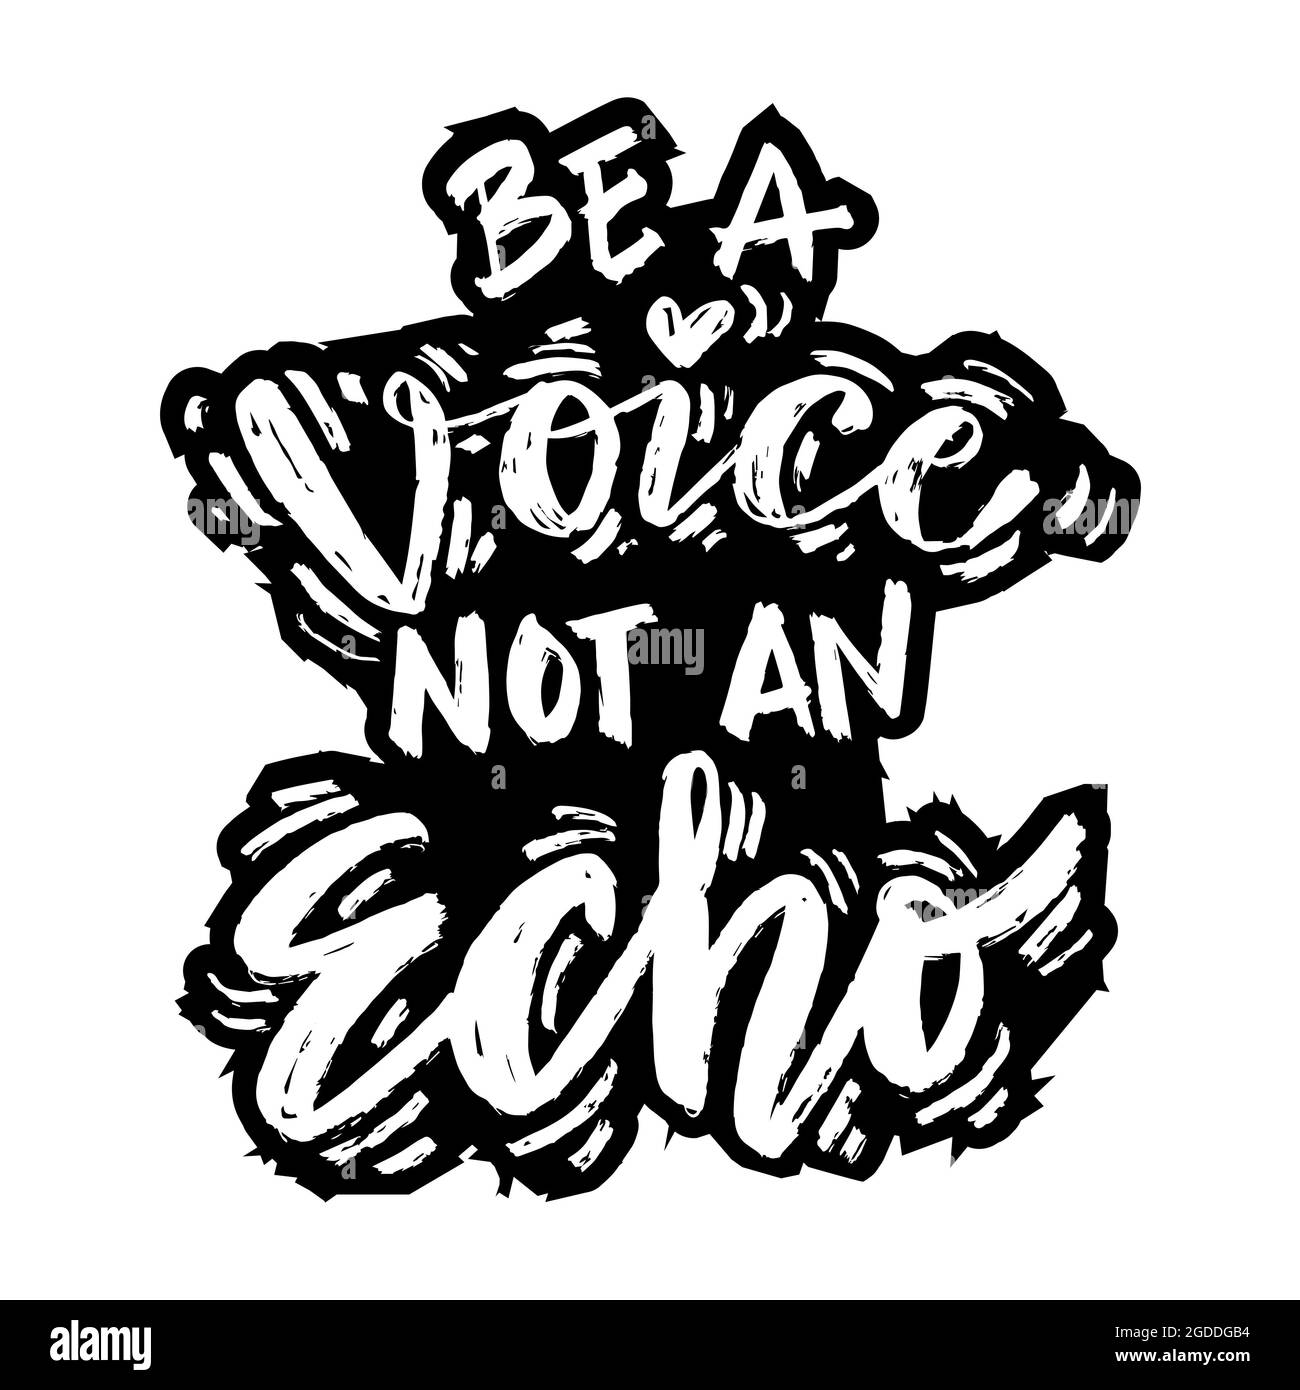 Wooden Sign White be a voice not an echo Wall Picture Holding Cushion Wooden Wall Slogan NEW